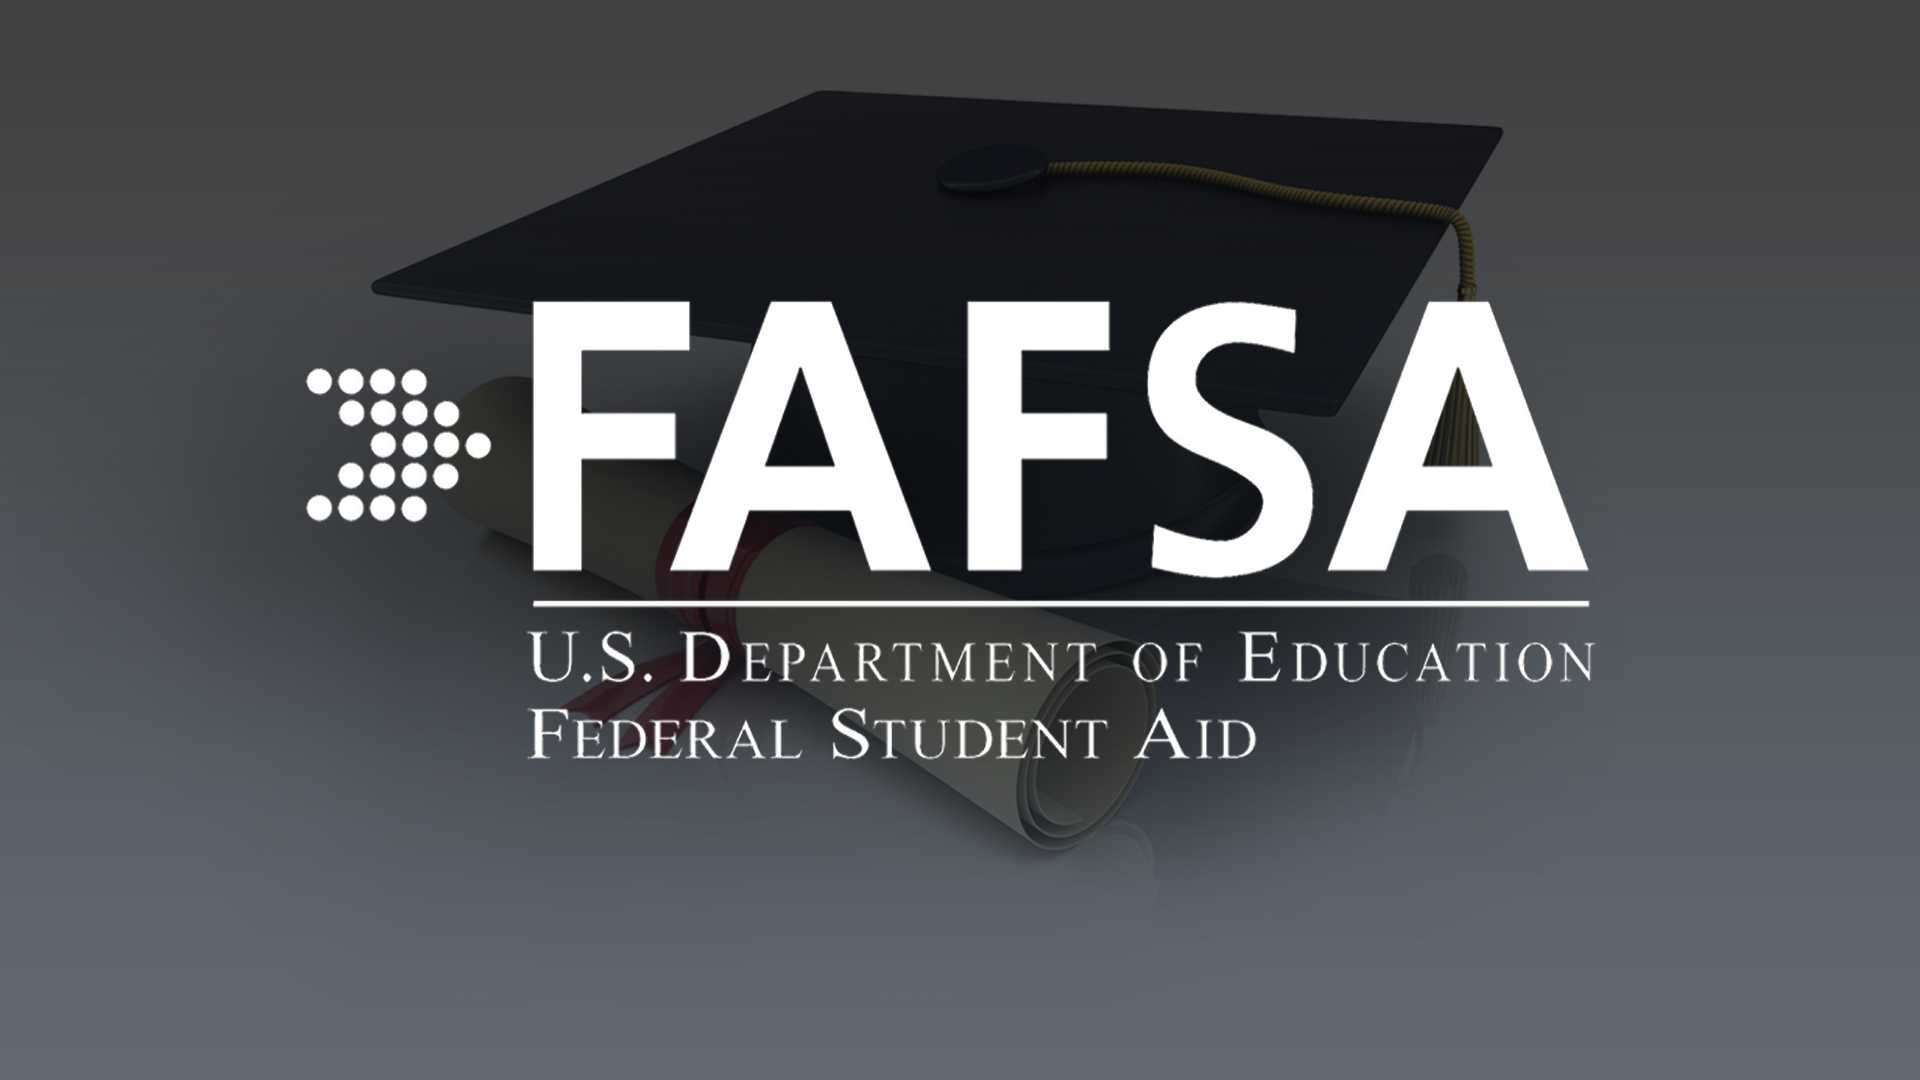 FAFSA applications are now open. Here’s what you should know before